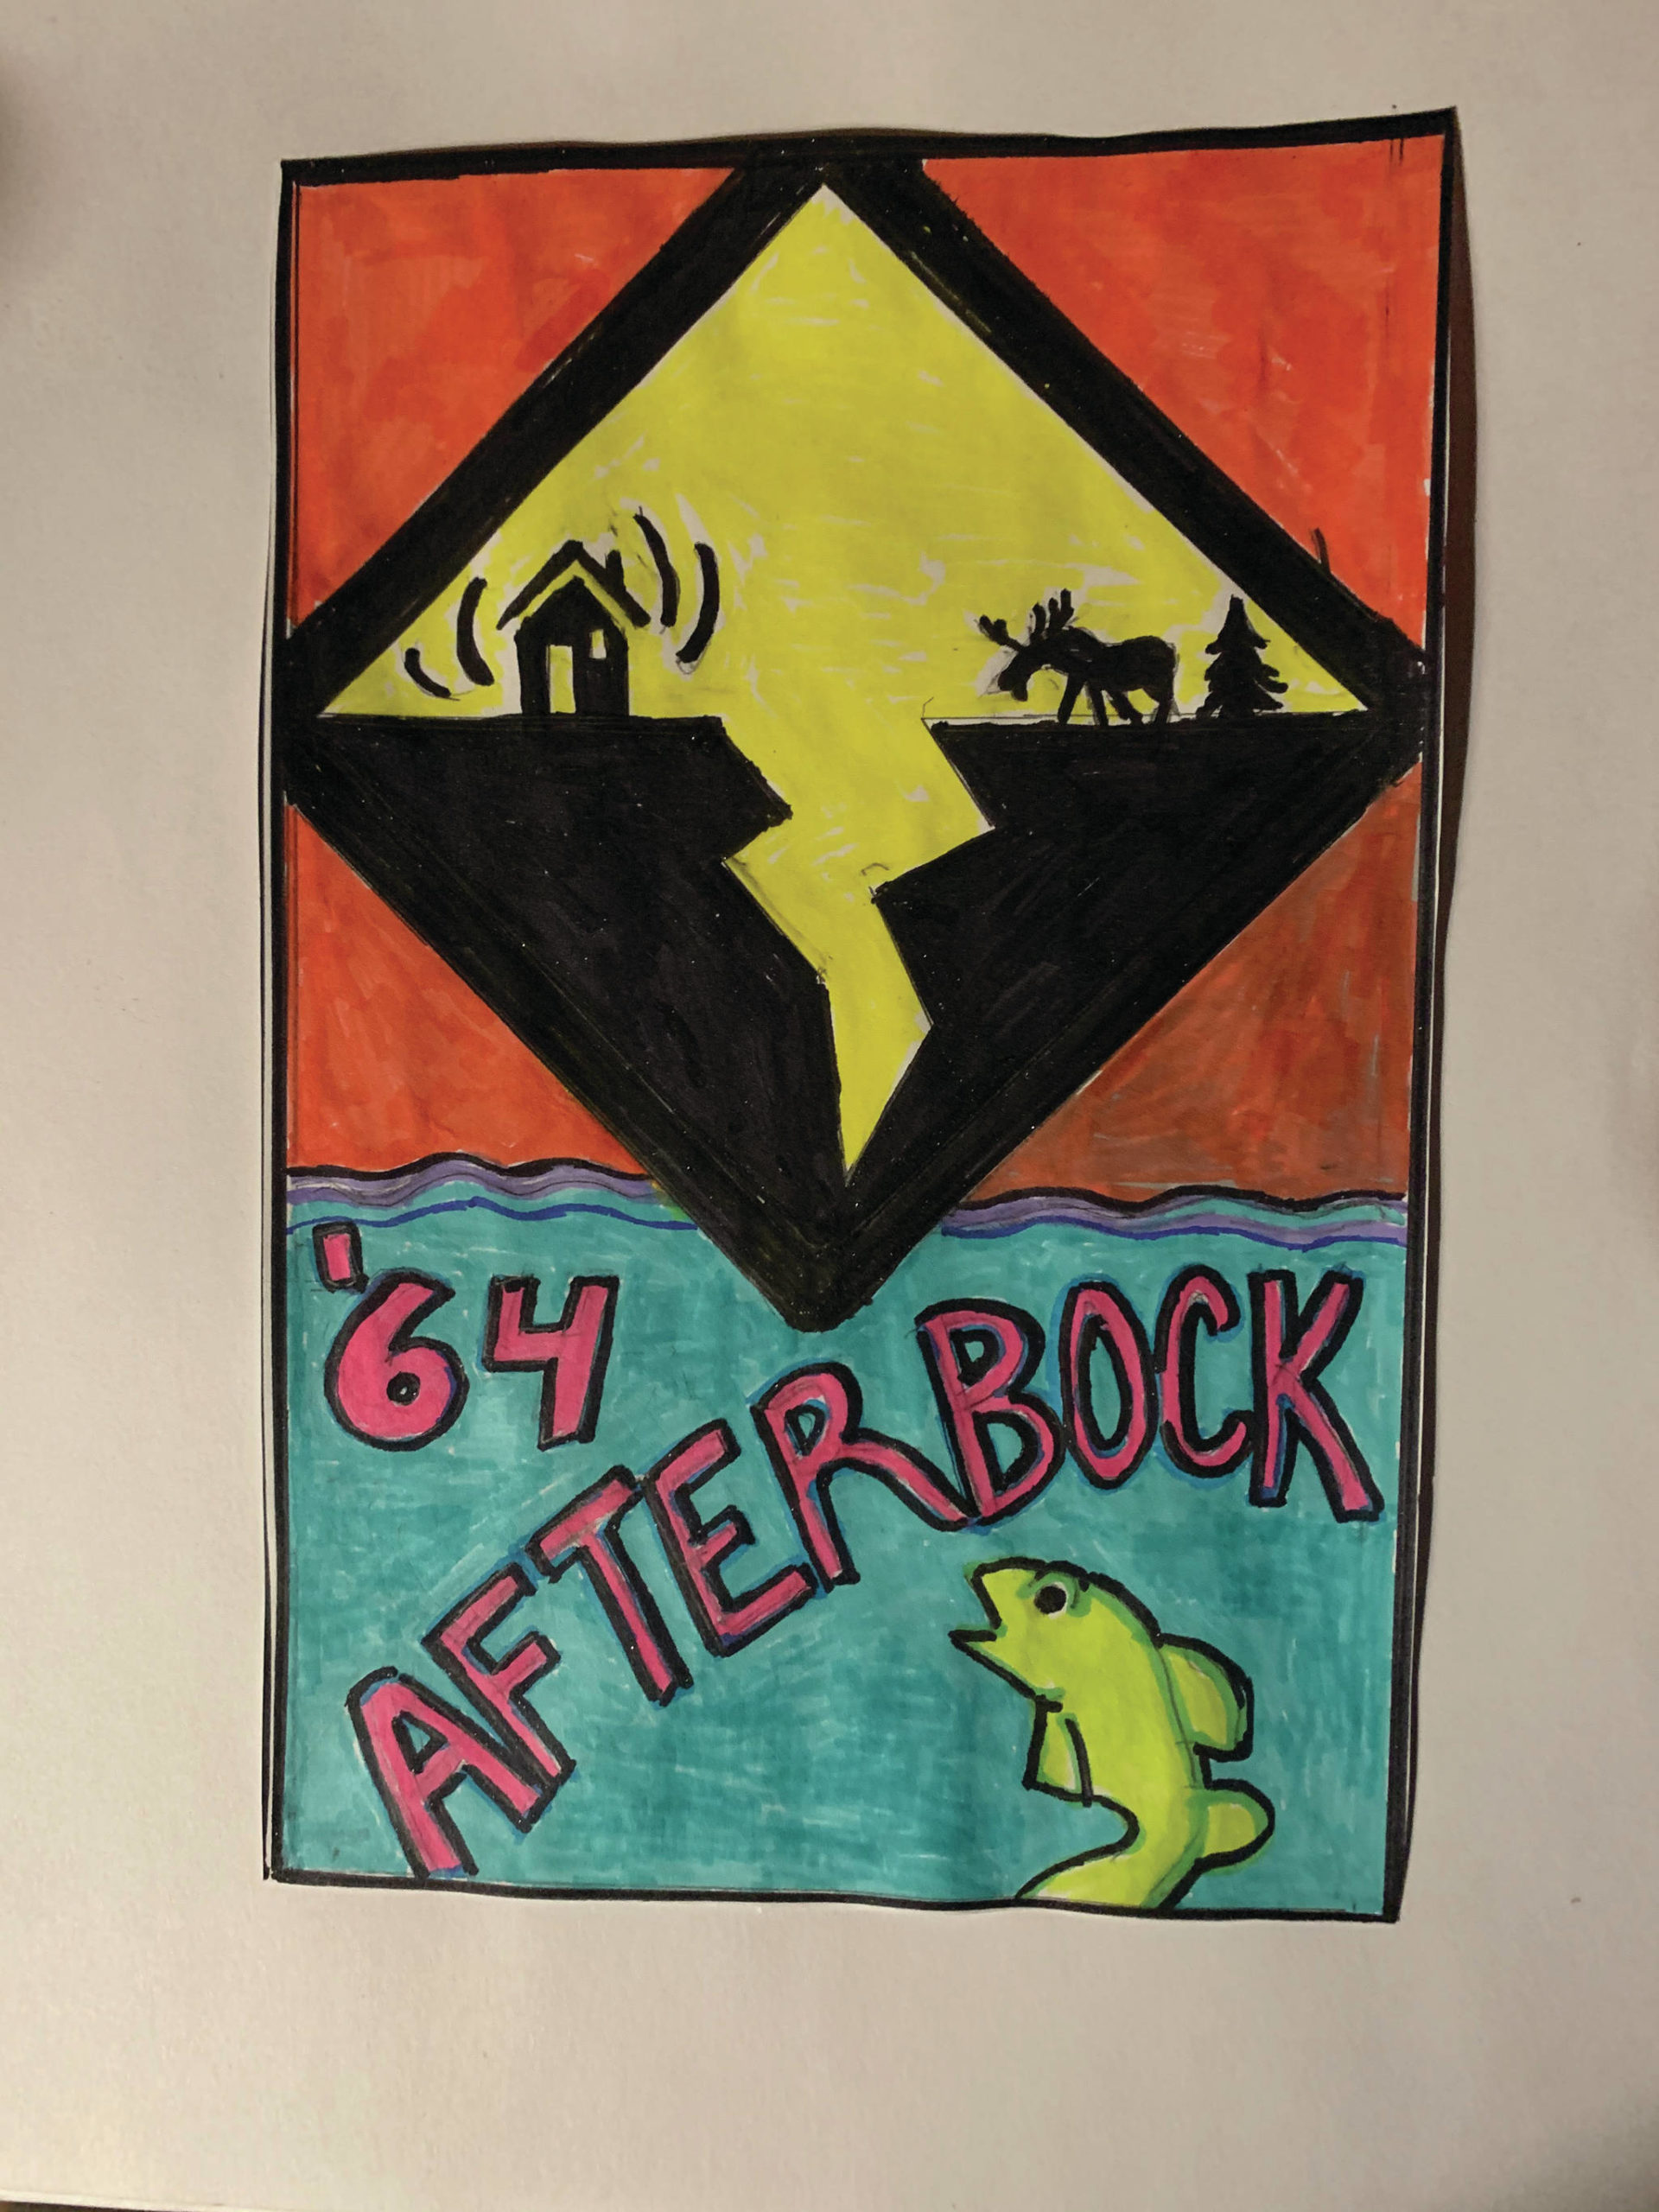 Coowe Walker’s design for Grace Ridge Brewery’s ‘64 Afterbock beer label contest to commemorate the 20th anniversary of the Kachemak Bay National Estuarine Research Reserve (KBNERR). The designs go on exhibit and the winning label will be revealed Friday, Feb. 5, 2021, at the brewery in Homer, Alaska. (Photo courtesy of Grace Ridge Brewery)